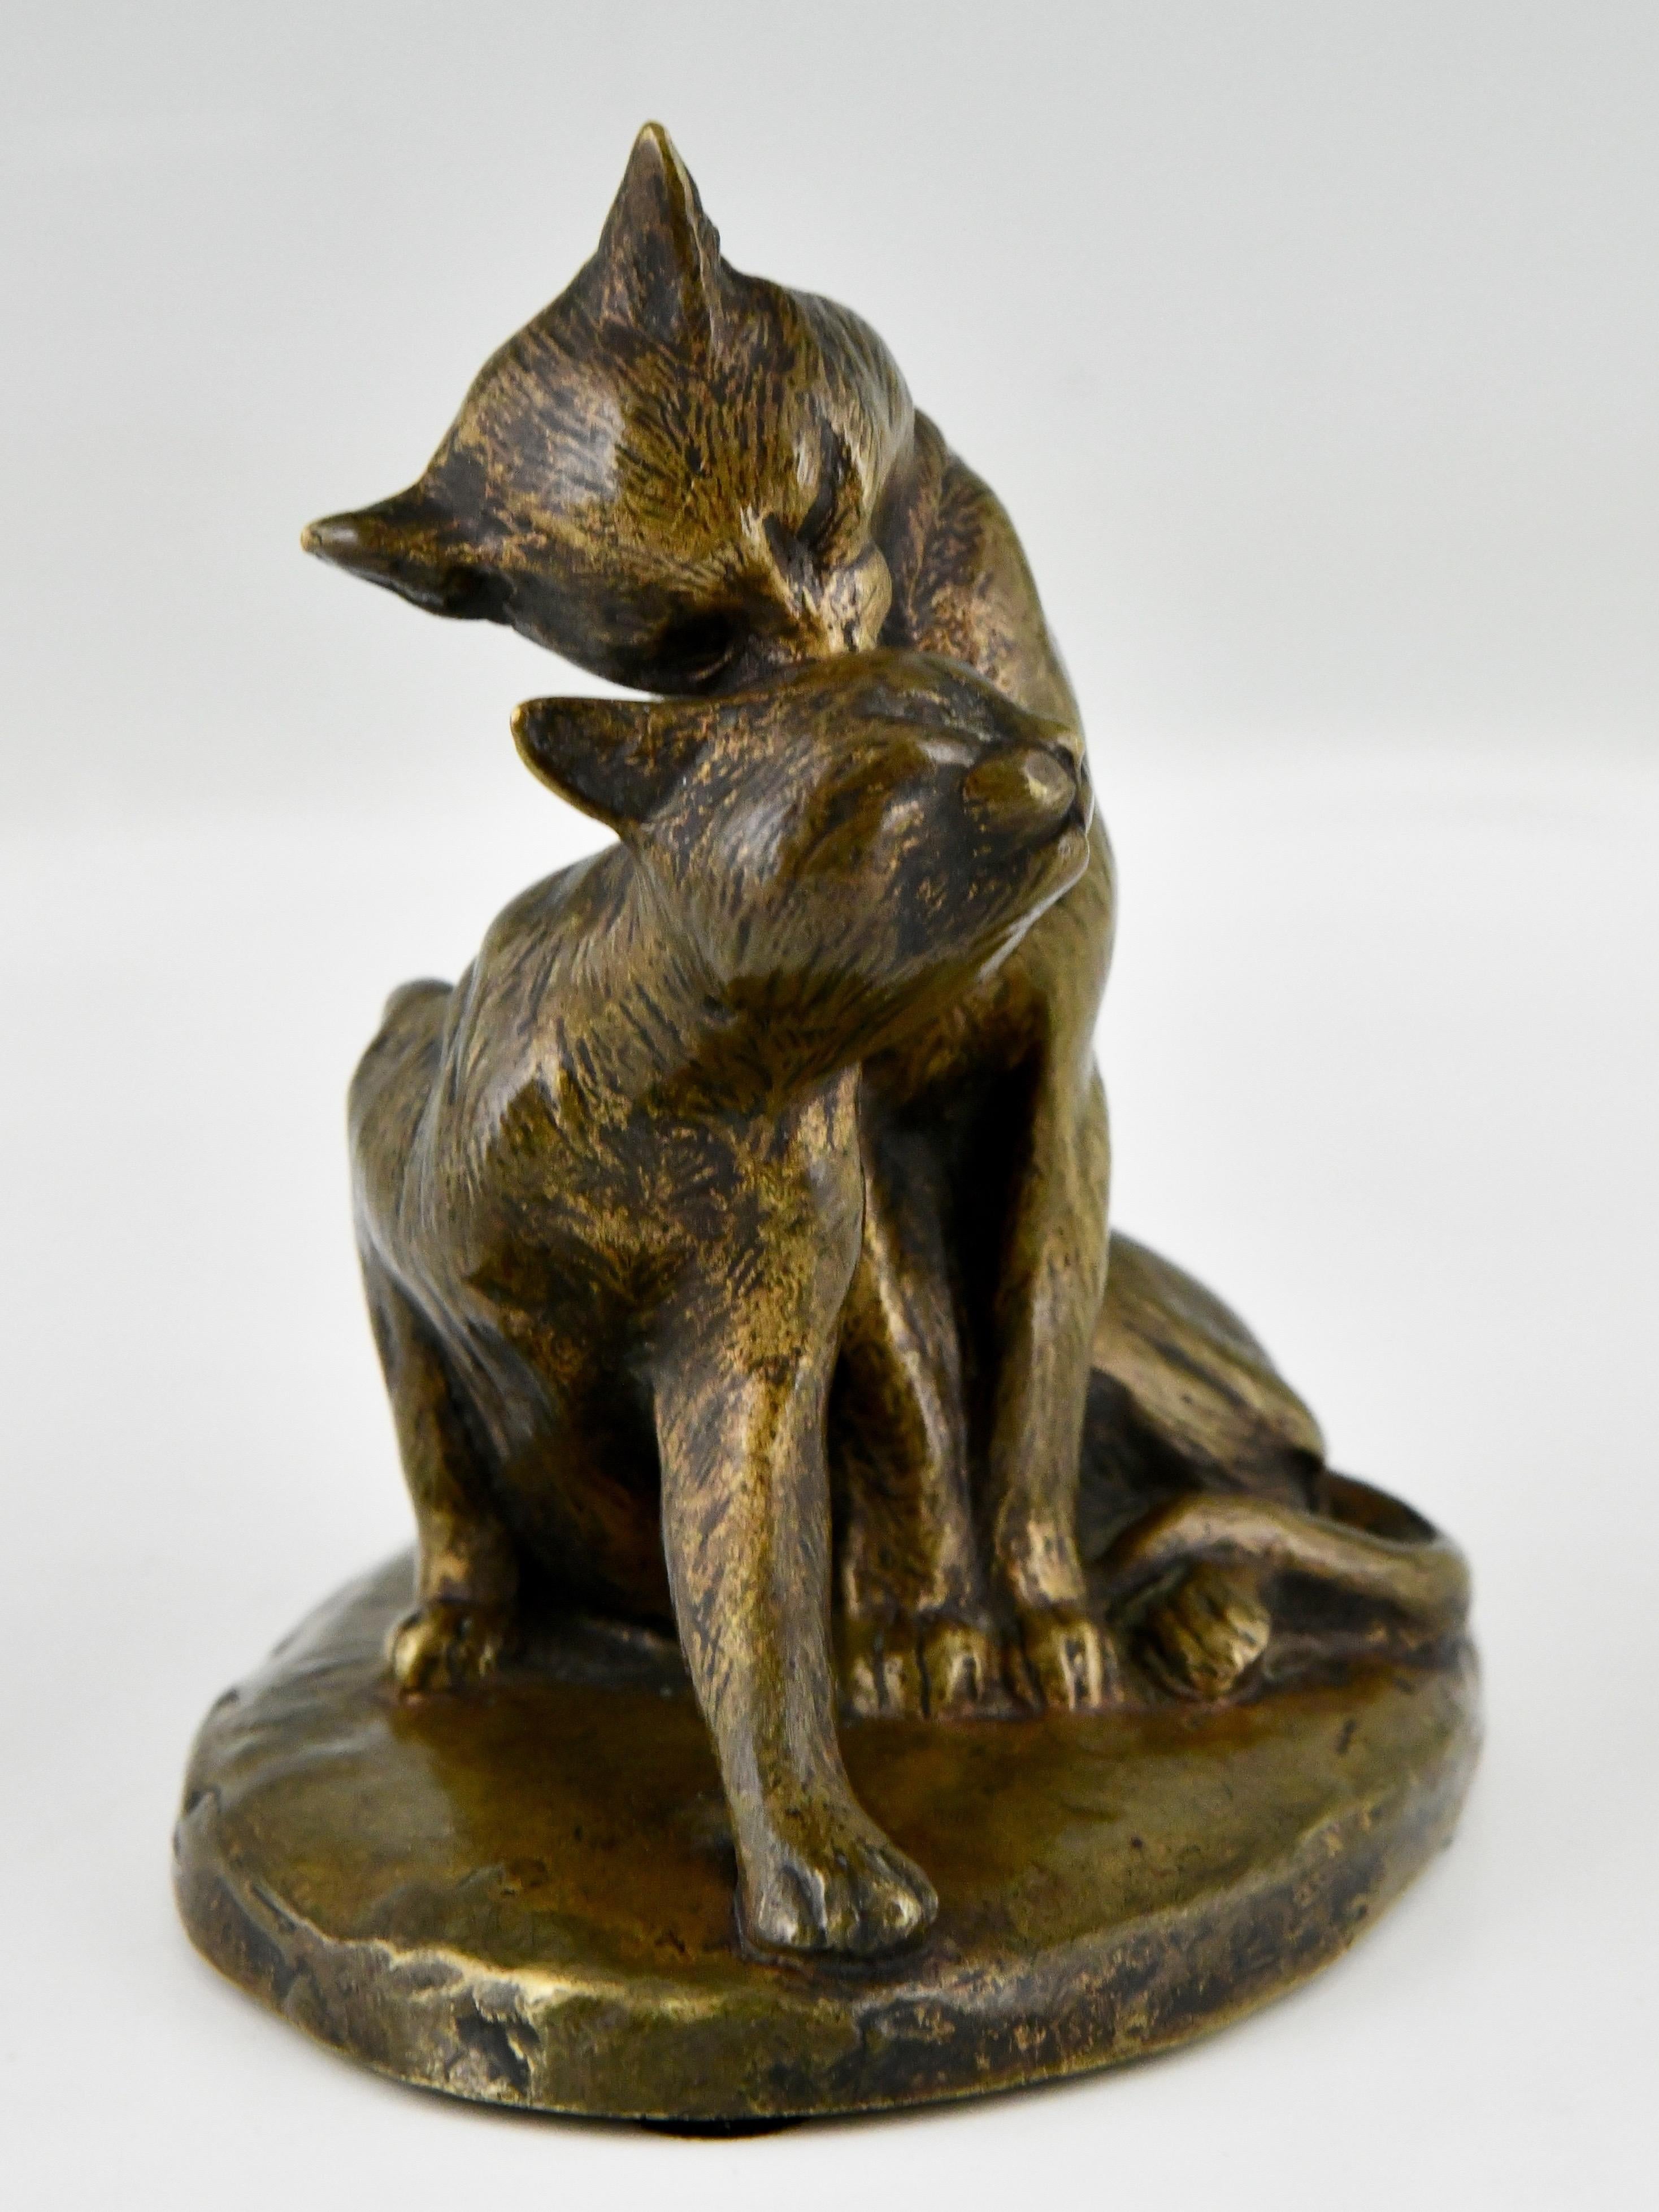 Antique bronze sculpture of two cats by Louis Riché.
Signed, with the foundry mark of Patrouilleau and marked Medaille d'Or. 
France circa 1900.